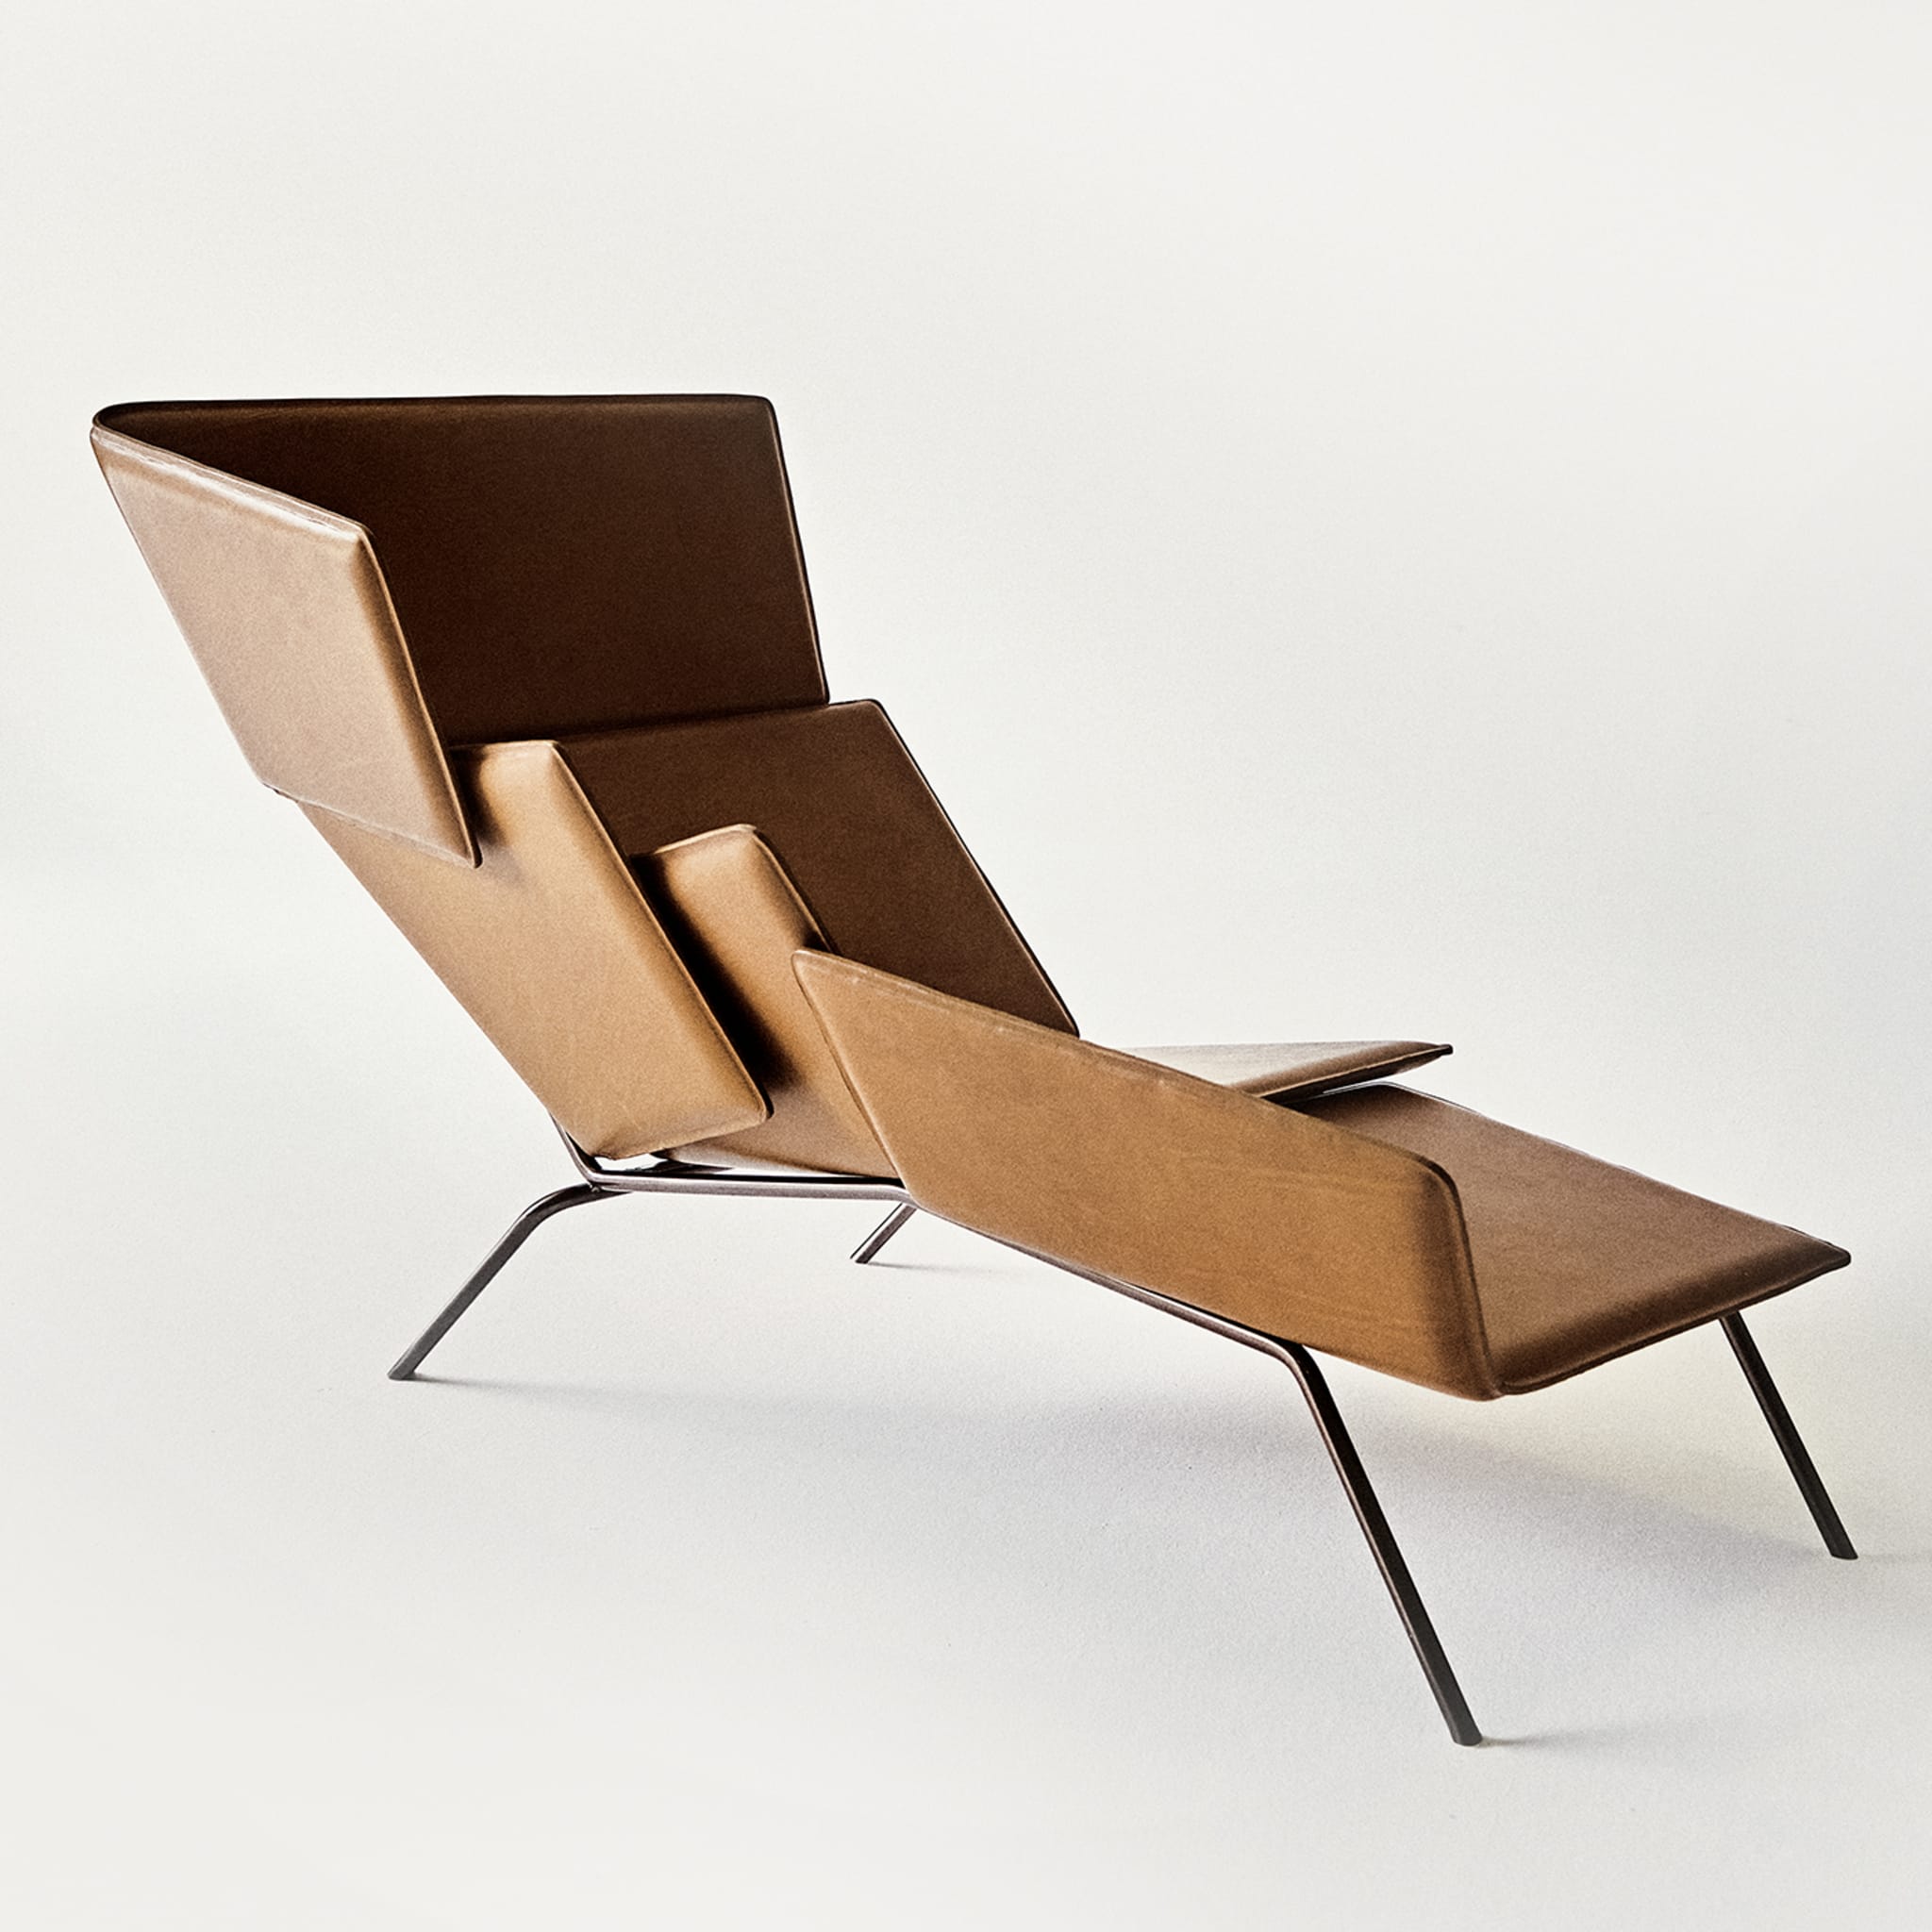 Blade Brown Chaise Longue by Ludovica + Roberto Palomba - Alternative view 2